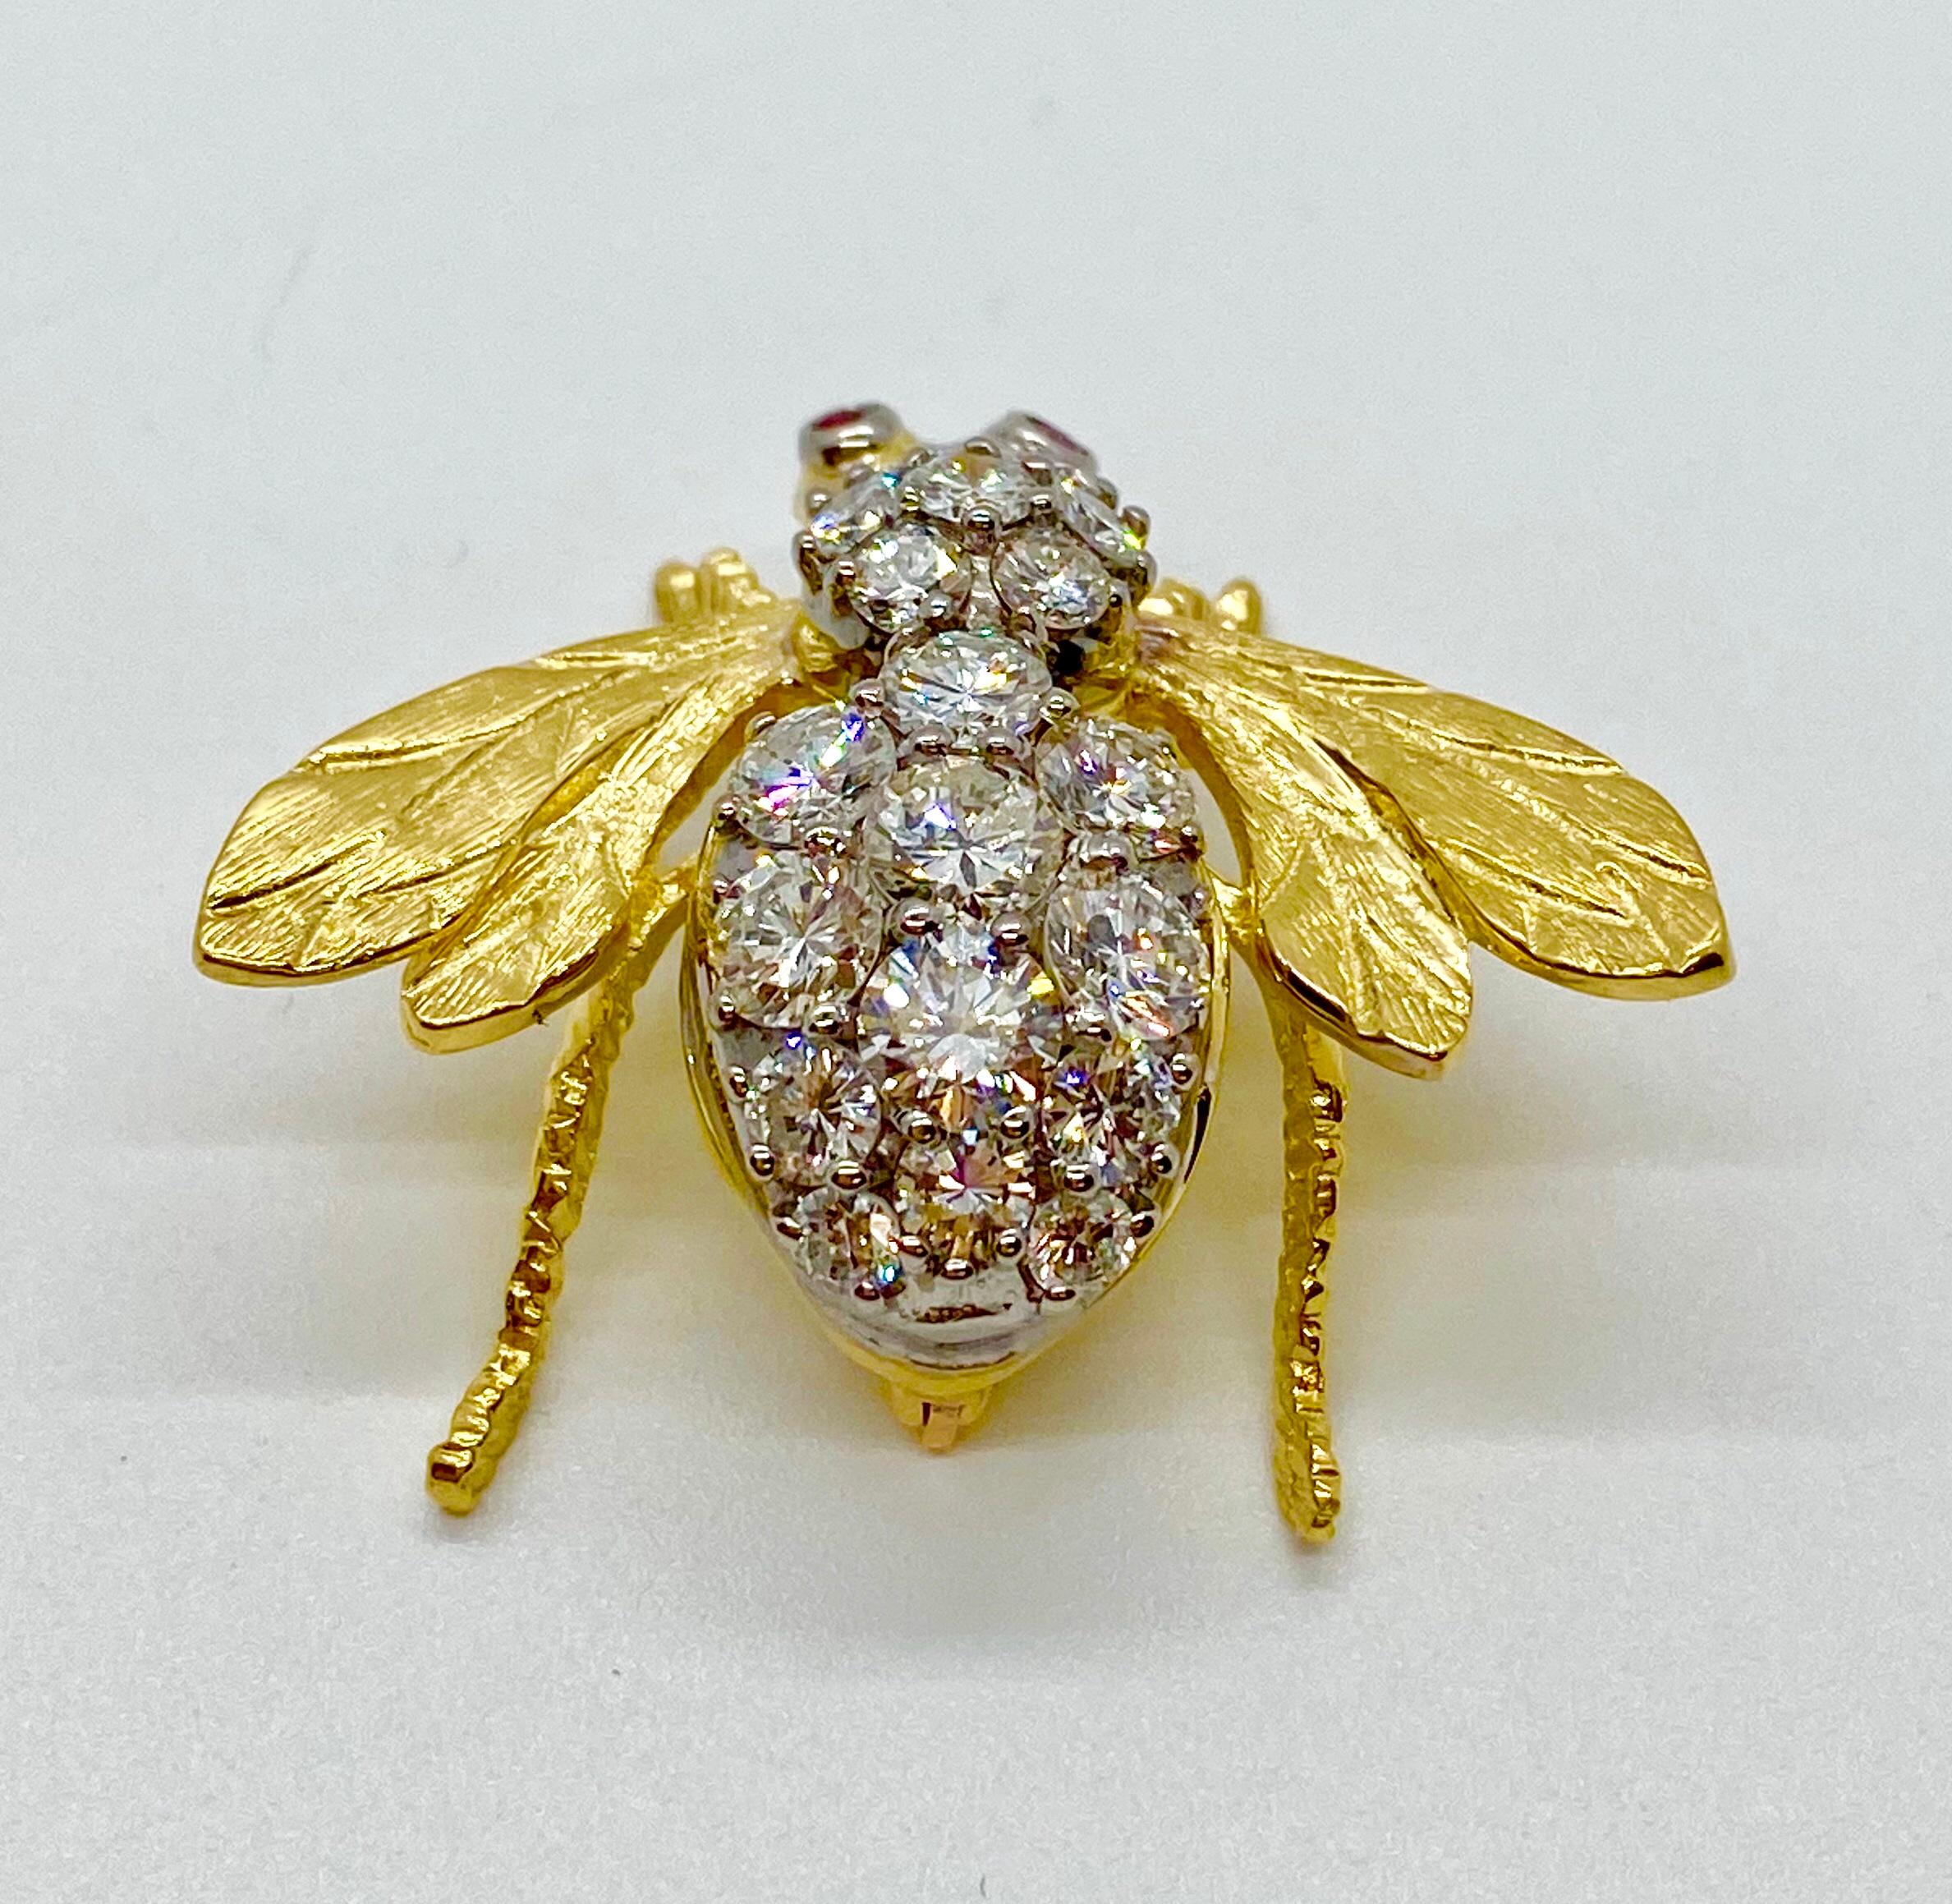 Vintage 18K yellow and white gold diamond bumble bee large brooch pin by Herbert Rosenthal.  There are 19 round brilliant cut diamonds weighing approximately 3.55 carat total weight G-H color and VS2 quality.  Bee has round ruby eyes weighing 0.10